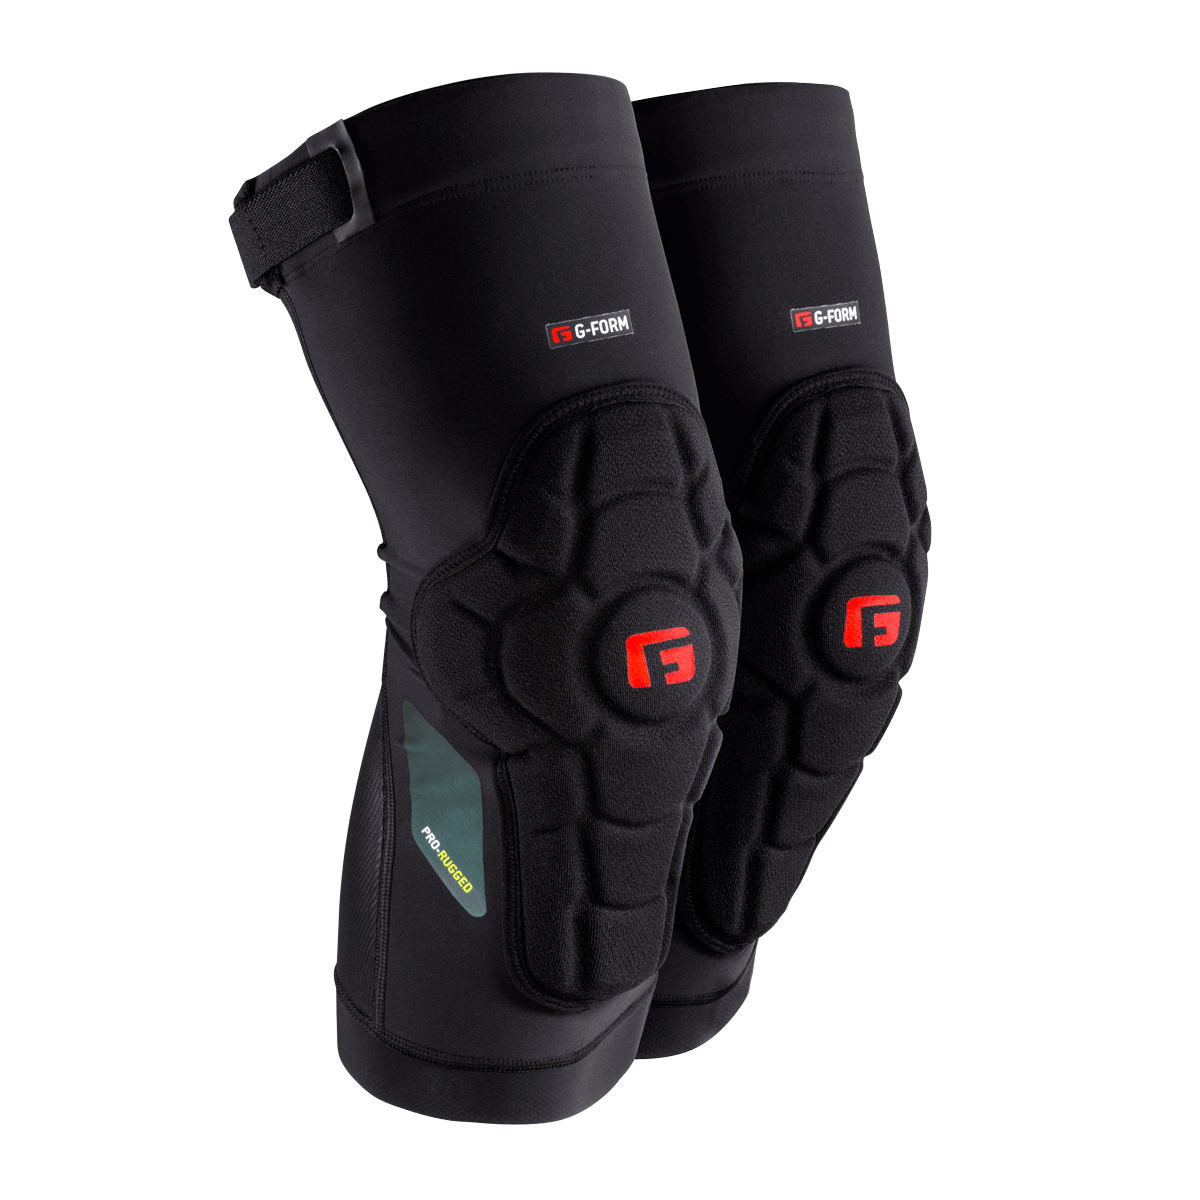 Pro-Rugged Breathable MTB Knee Pads for Enduro & Trails